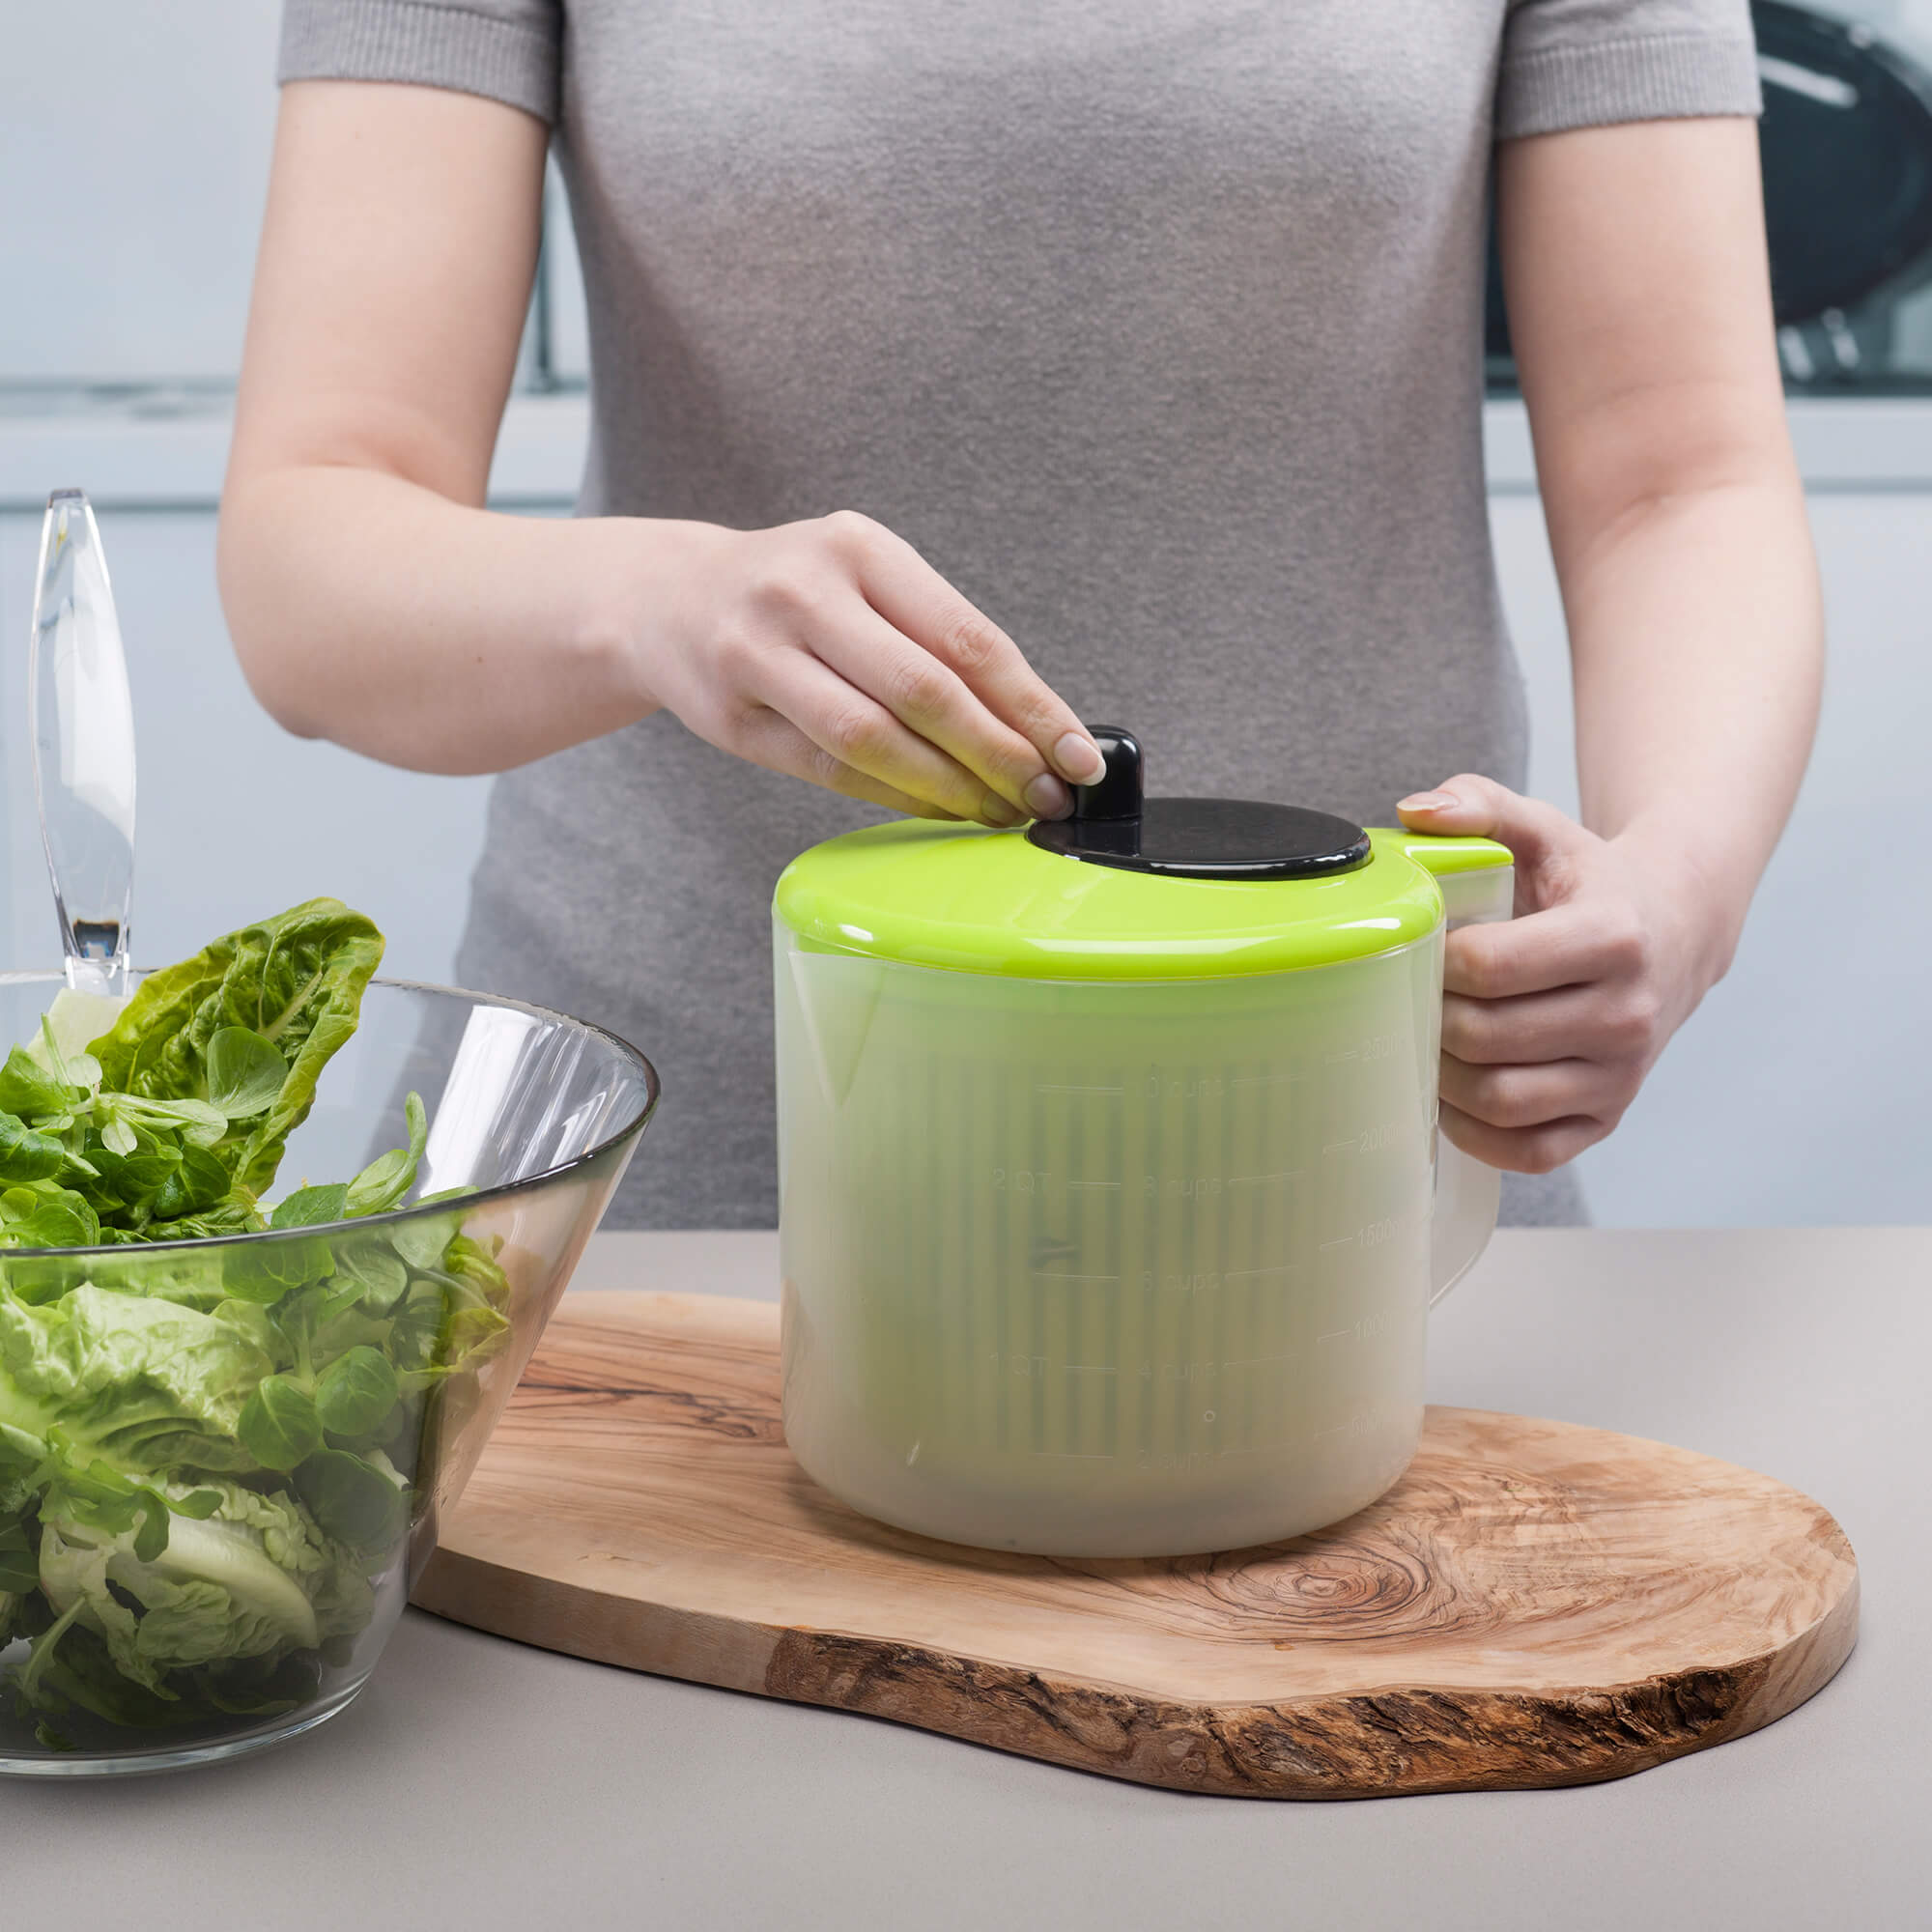 Zeal Salad Spinner with Microwavable Jug in use